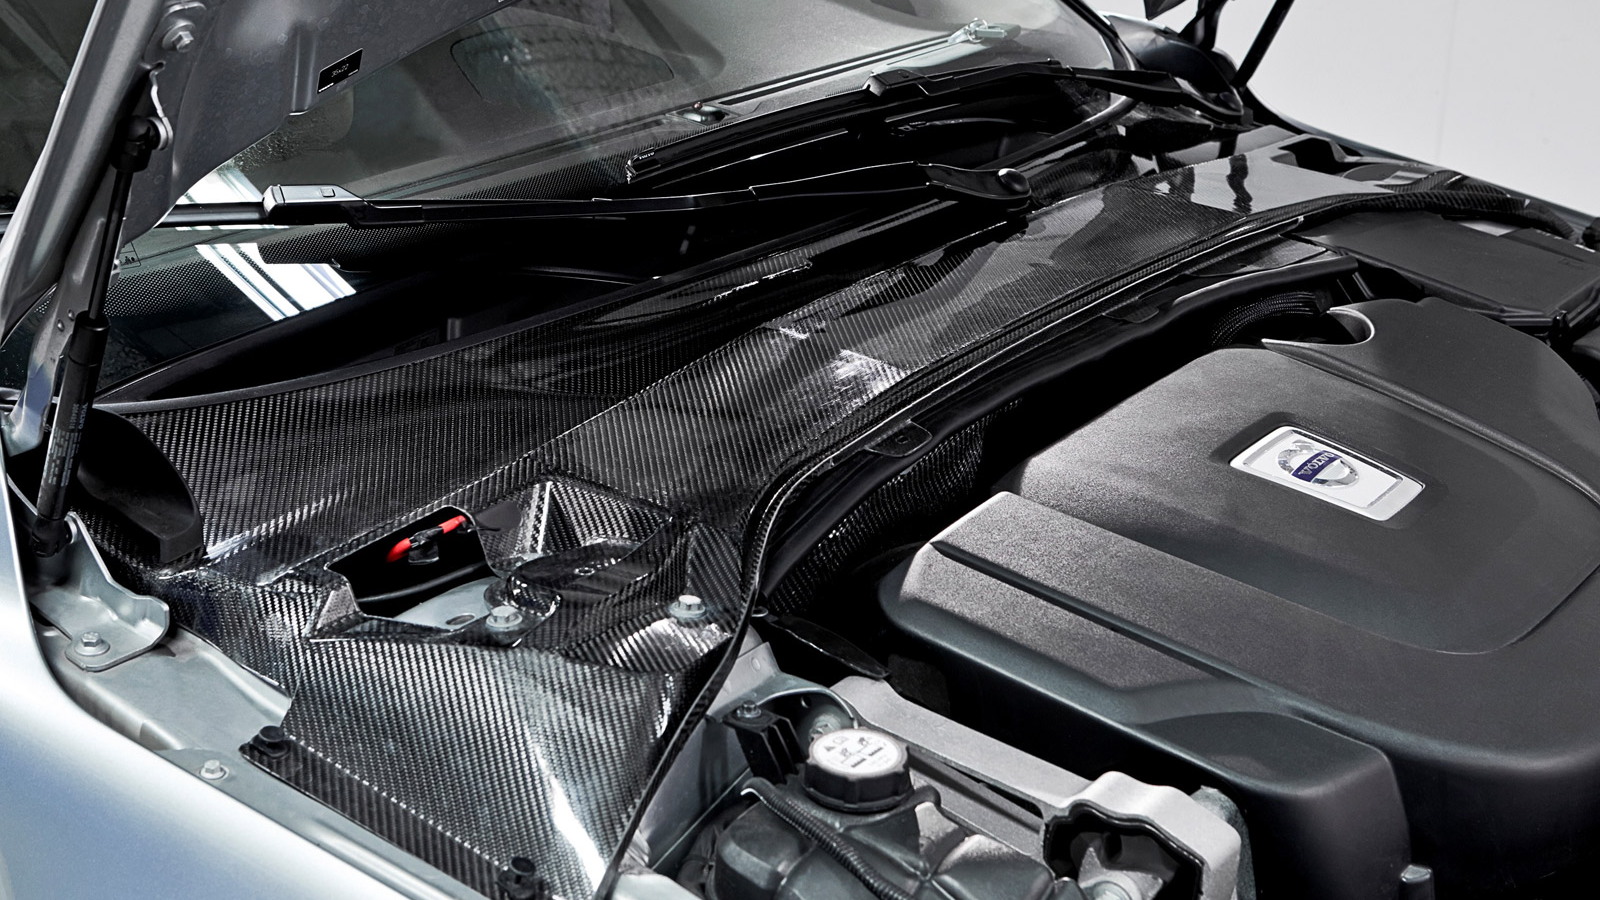 Nano structured batteries and super capacitors integrated into carbon fiber panel